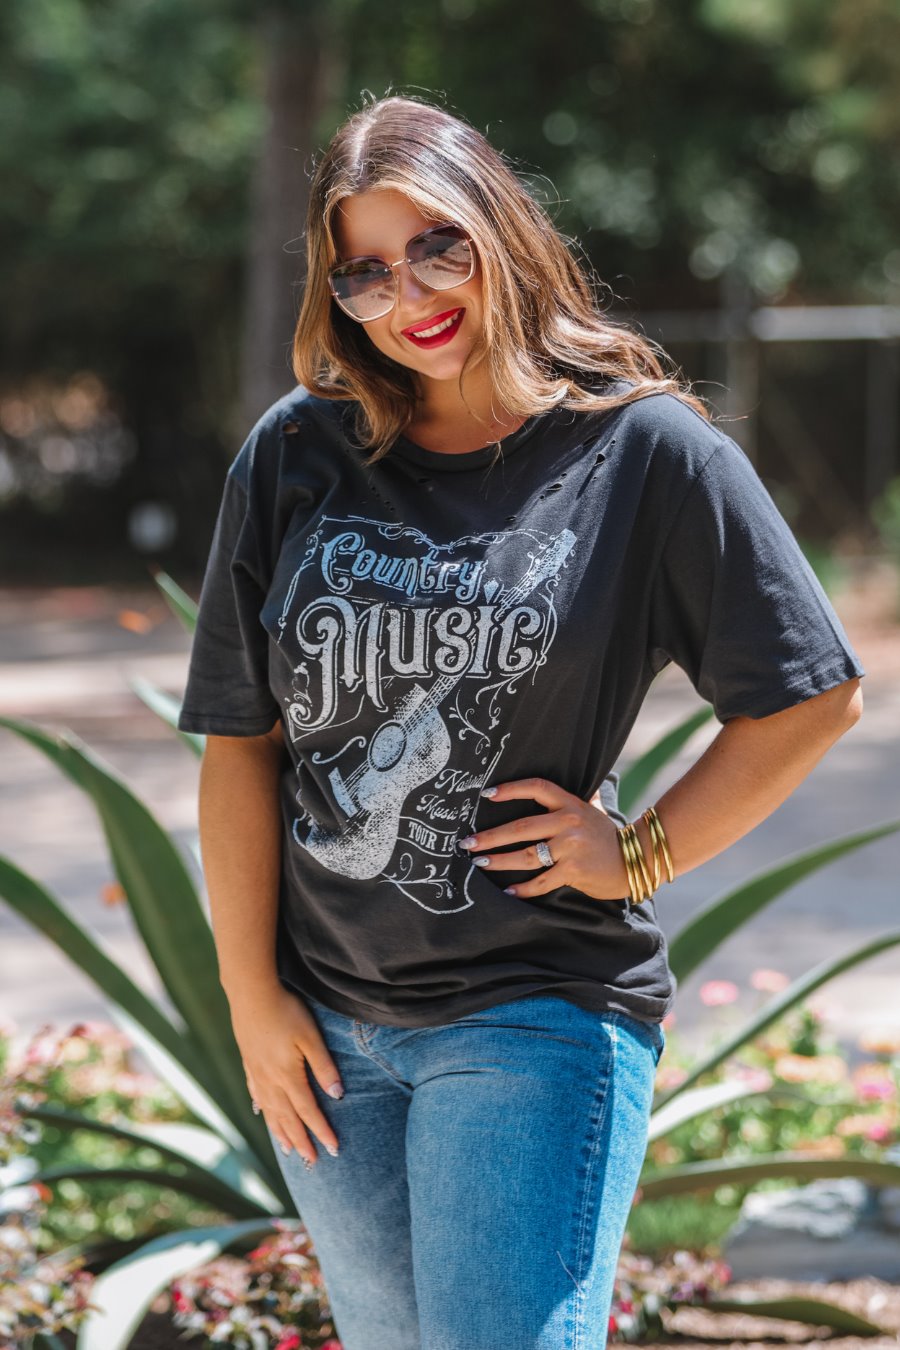 Country Music Graphic Tee - Jess Lea Boutique